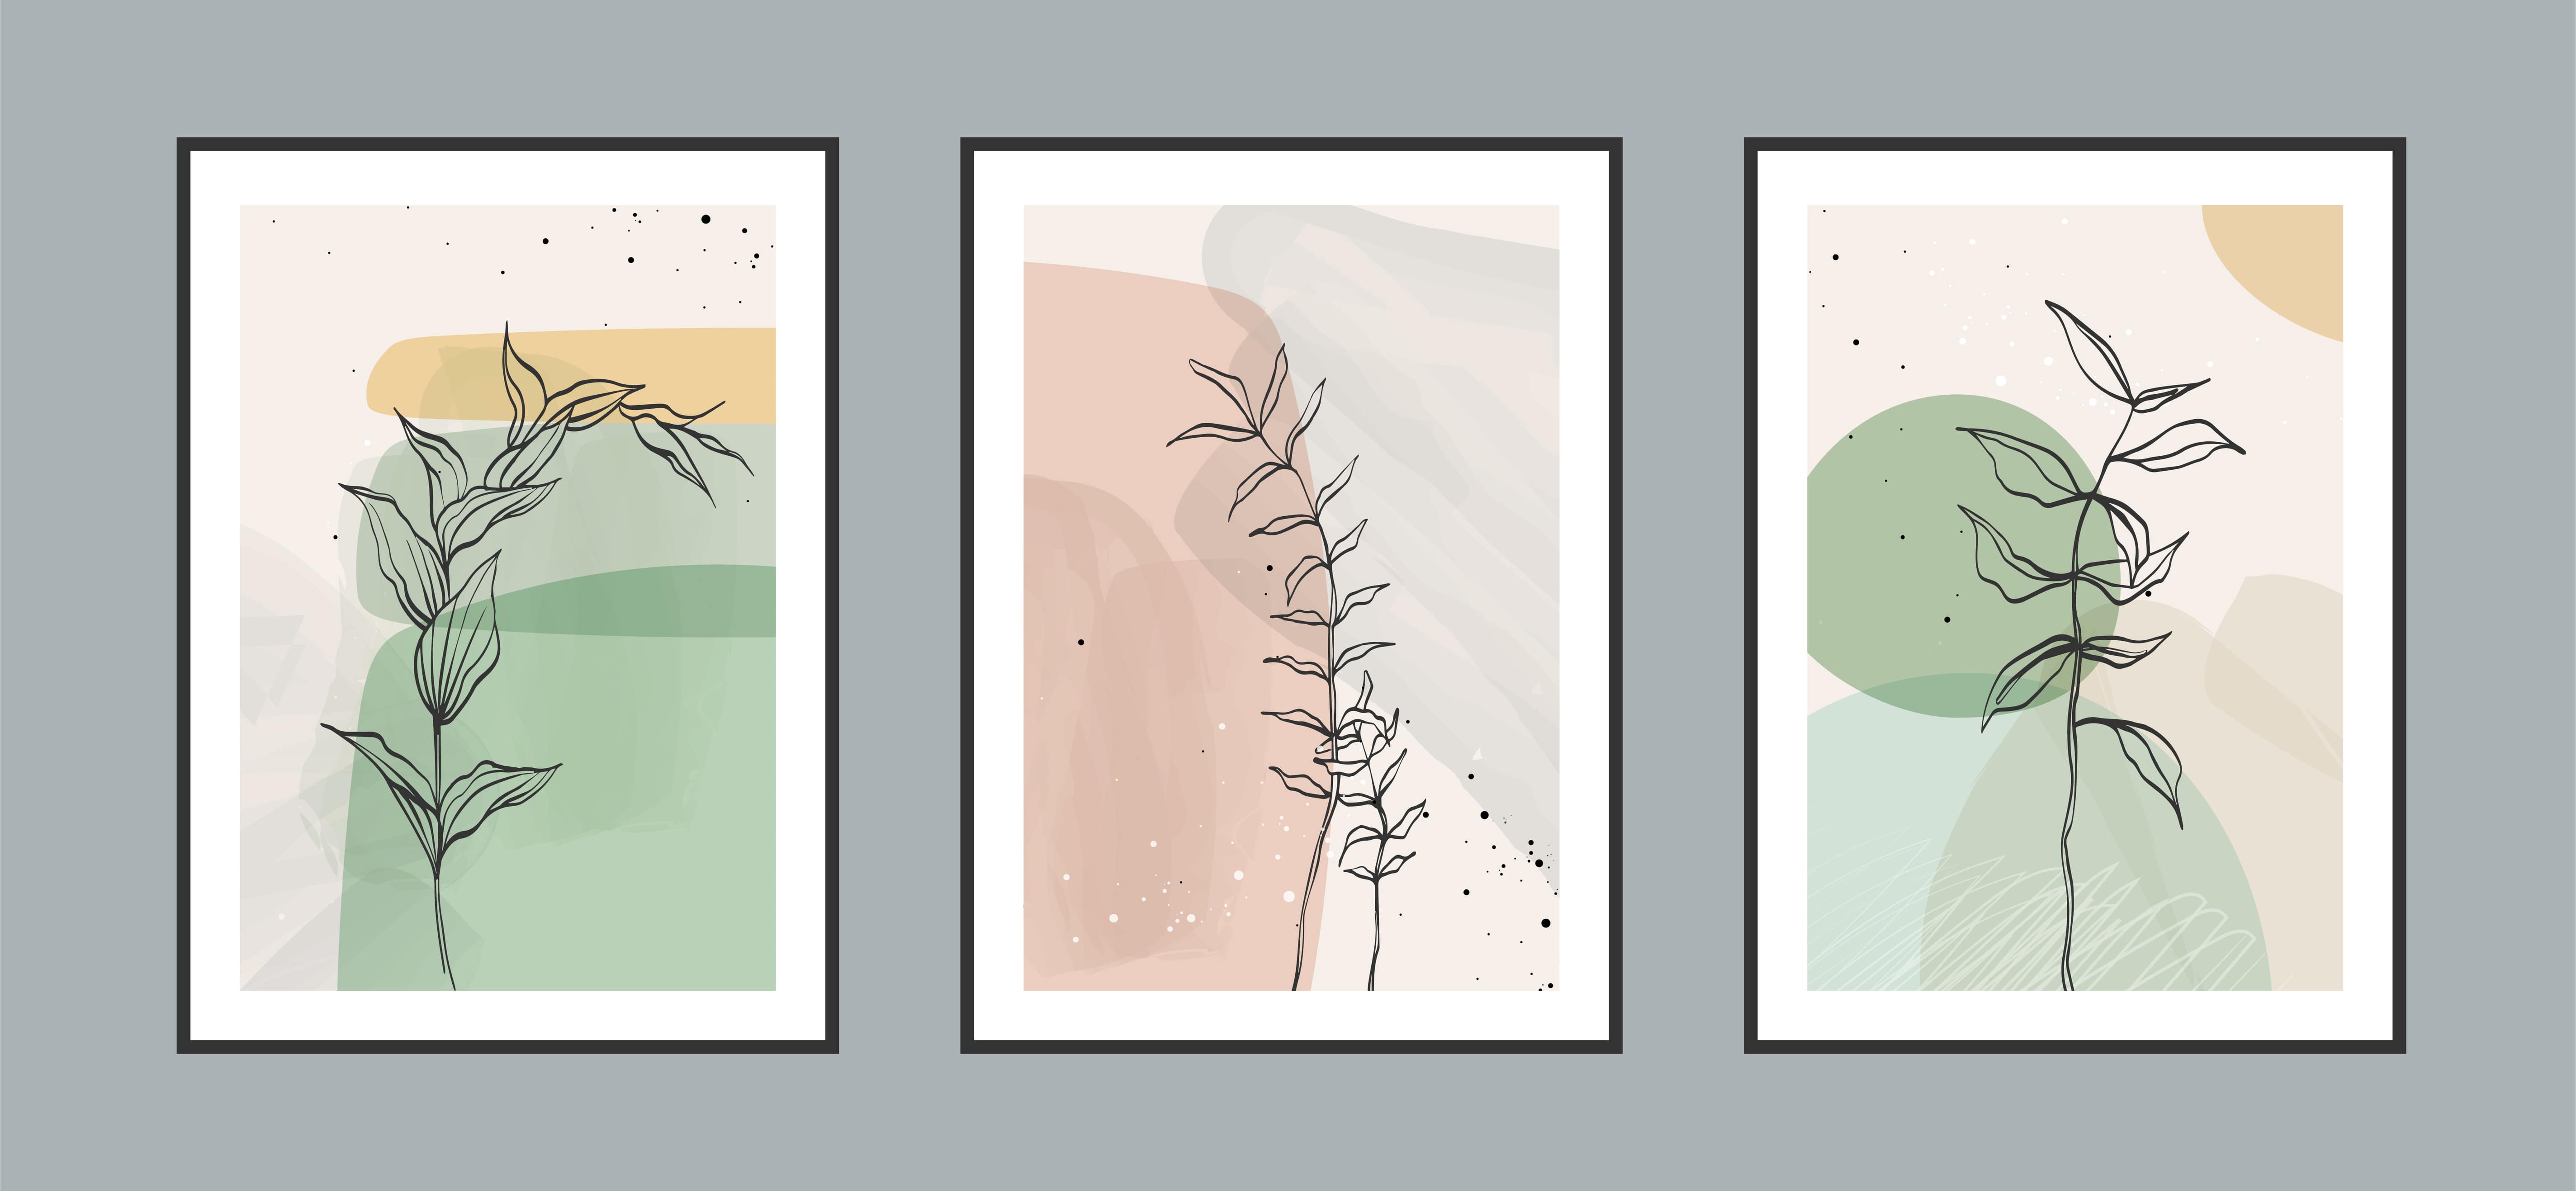 Three framed abstract leaf line drawings with muted tones of green, pink and yellow in the background